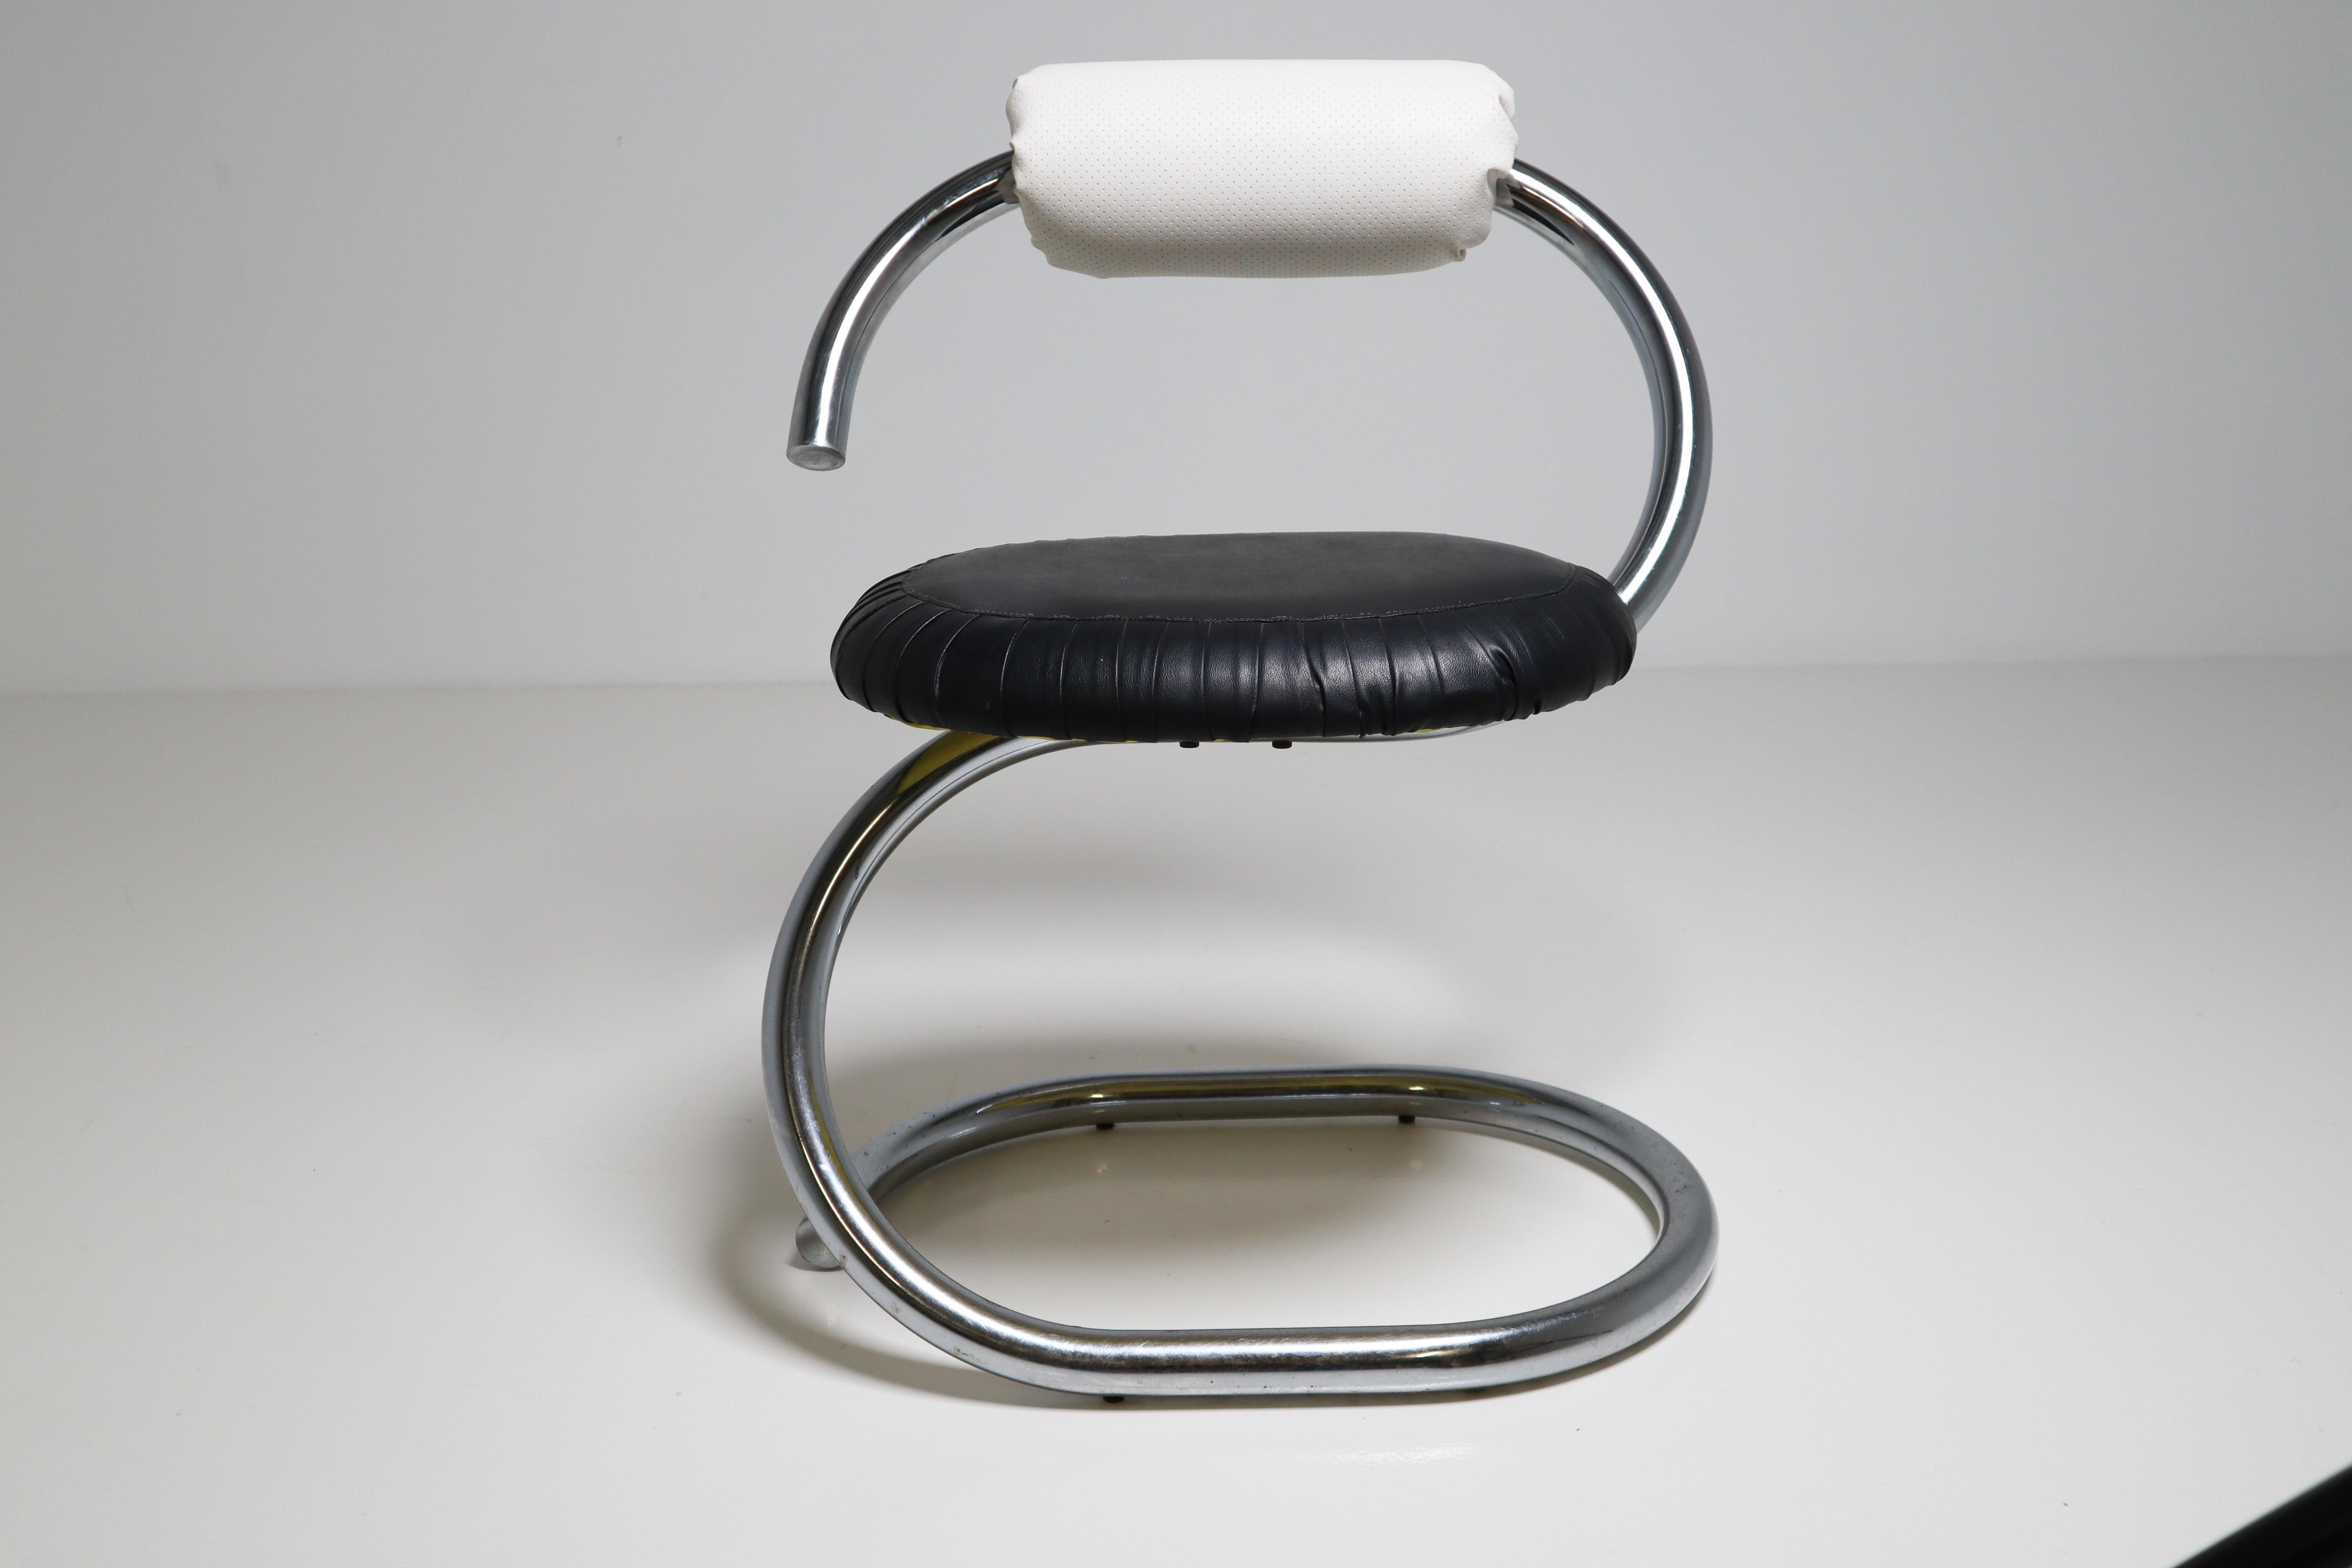 The Cobra chair was designed by Giotto Stoppino in the 1970s and consisting of a chrome metal tubular structure snaking up to the seat. The seat and back are filled with foam covered in black and white leatherette in a good vintage condition.